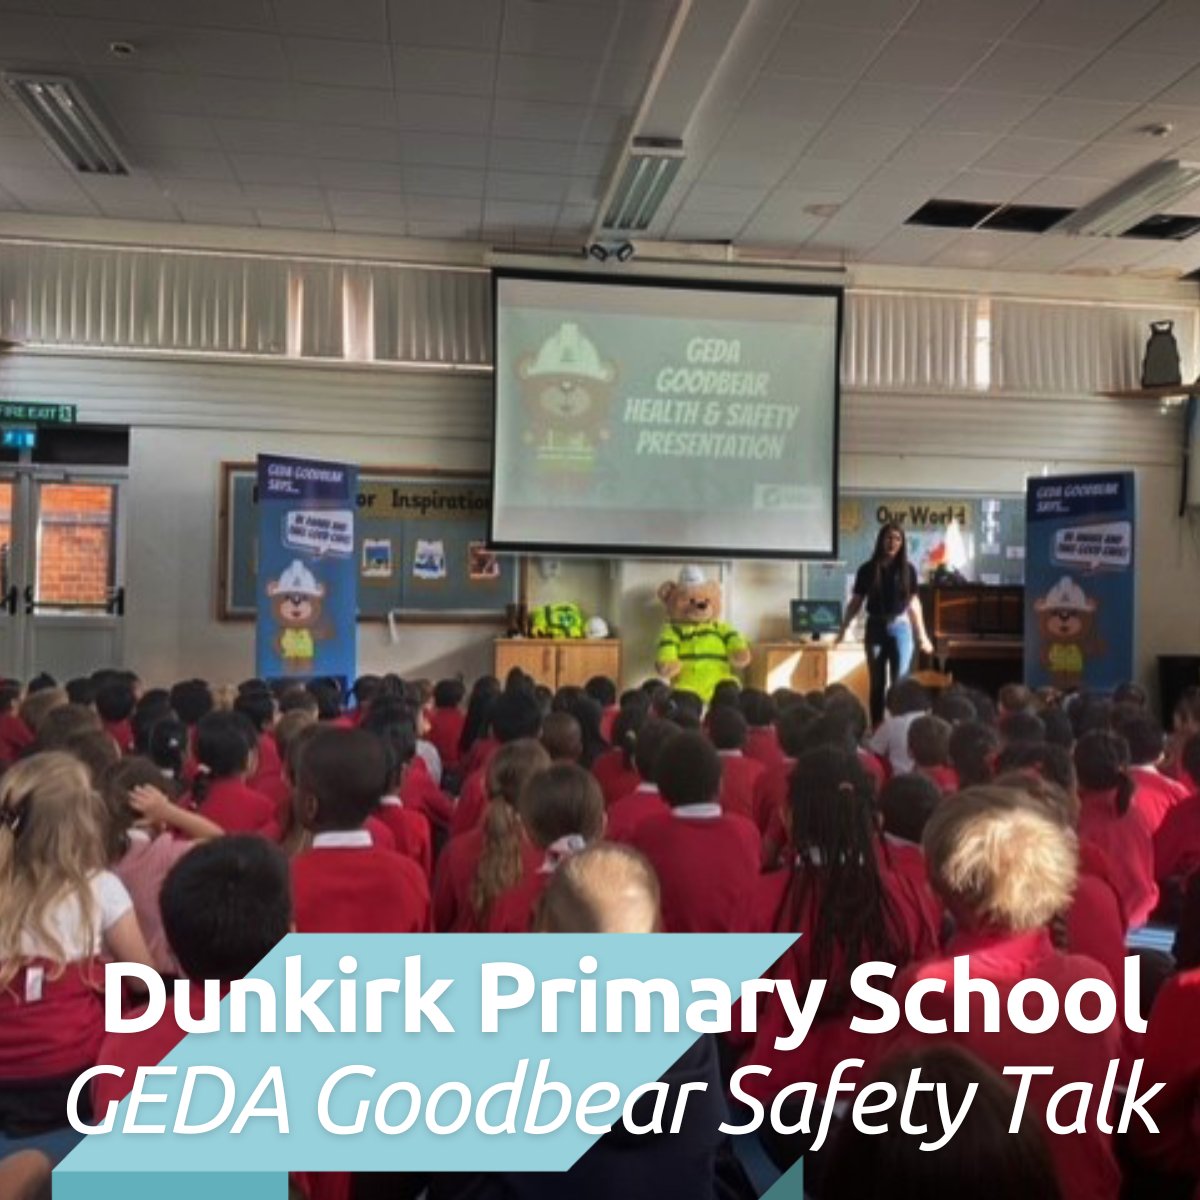 GEDA Goodbear had the pleasure of visiting Dunkirk Primary School in #Nottingham.

He gave a presentation aimed to raise awareness among the #Pupils about potential hazards on a #Worksite.

#SchoolVisit #BABN #AffordableHomes

@MyNottingham | @HomesEngland  | @JigsawMidlands